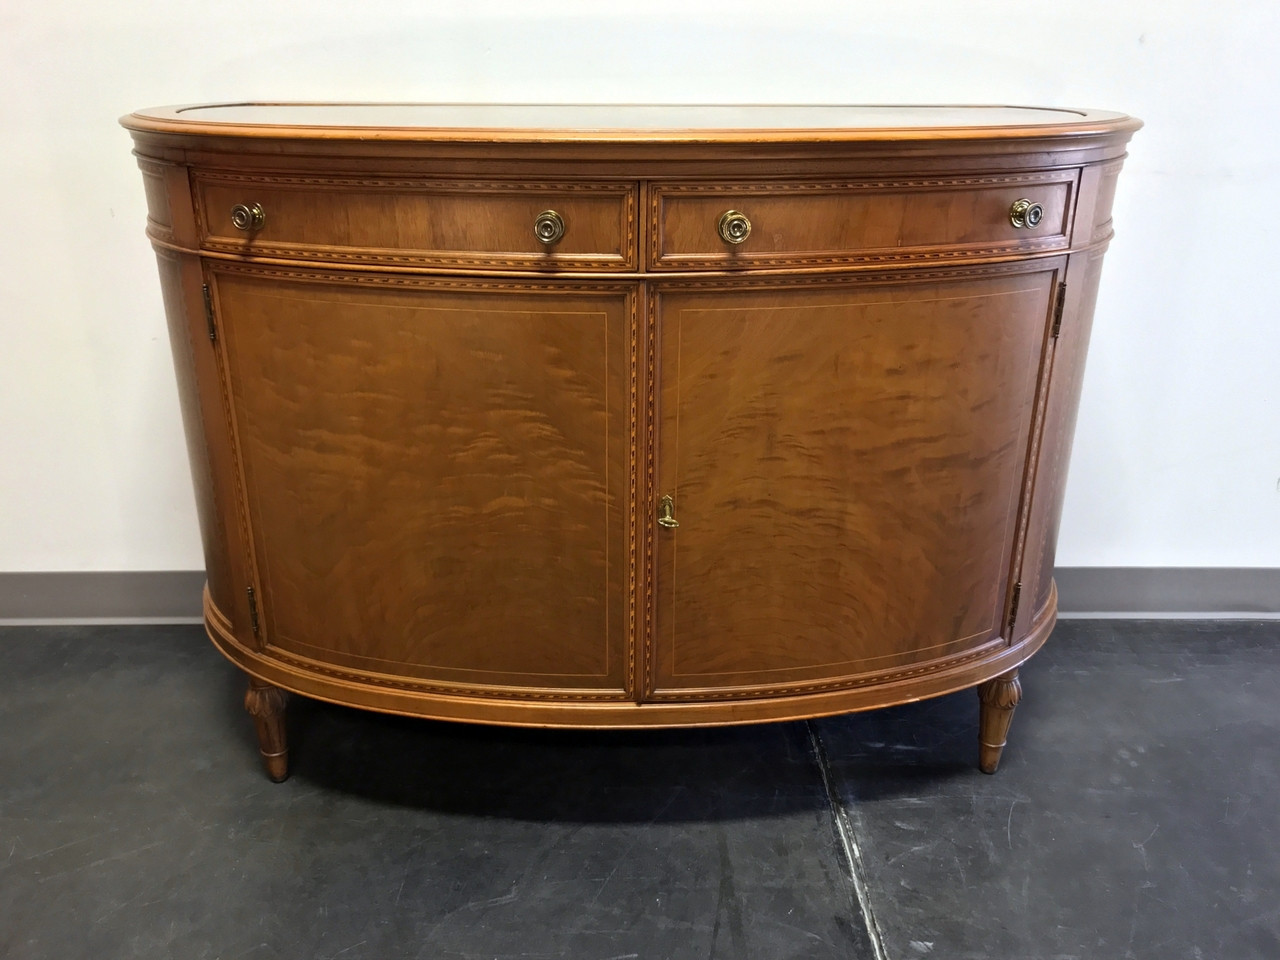 Vintage Inlaid Walnut Sheraton Style Marble Top Buffet Sideboard